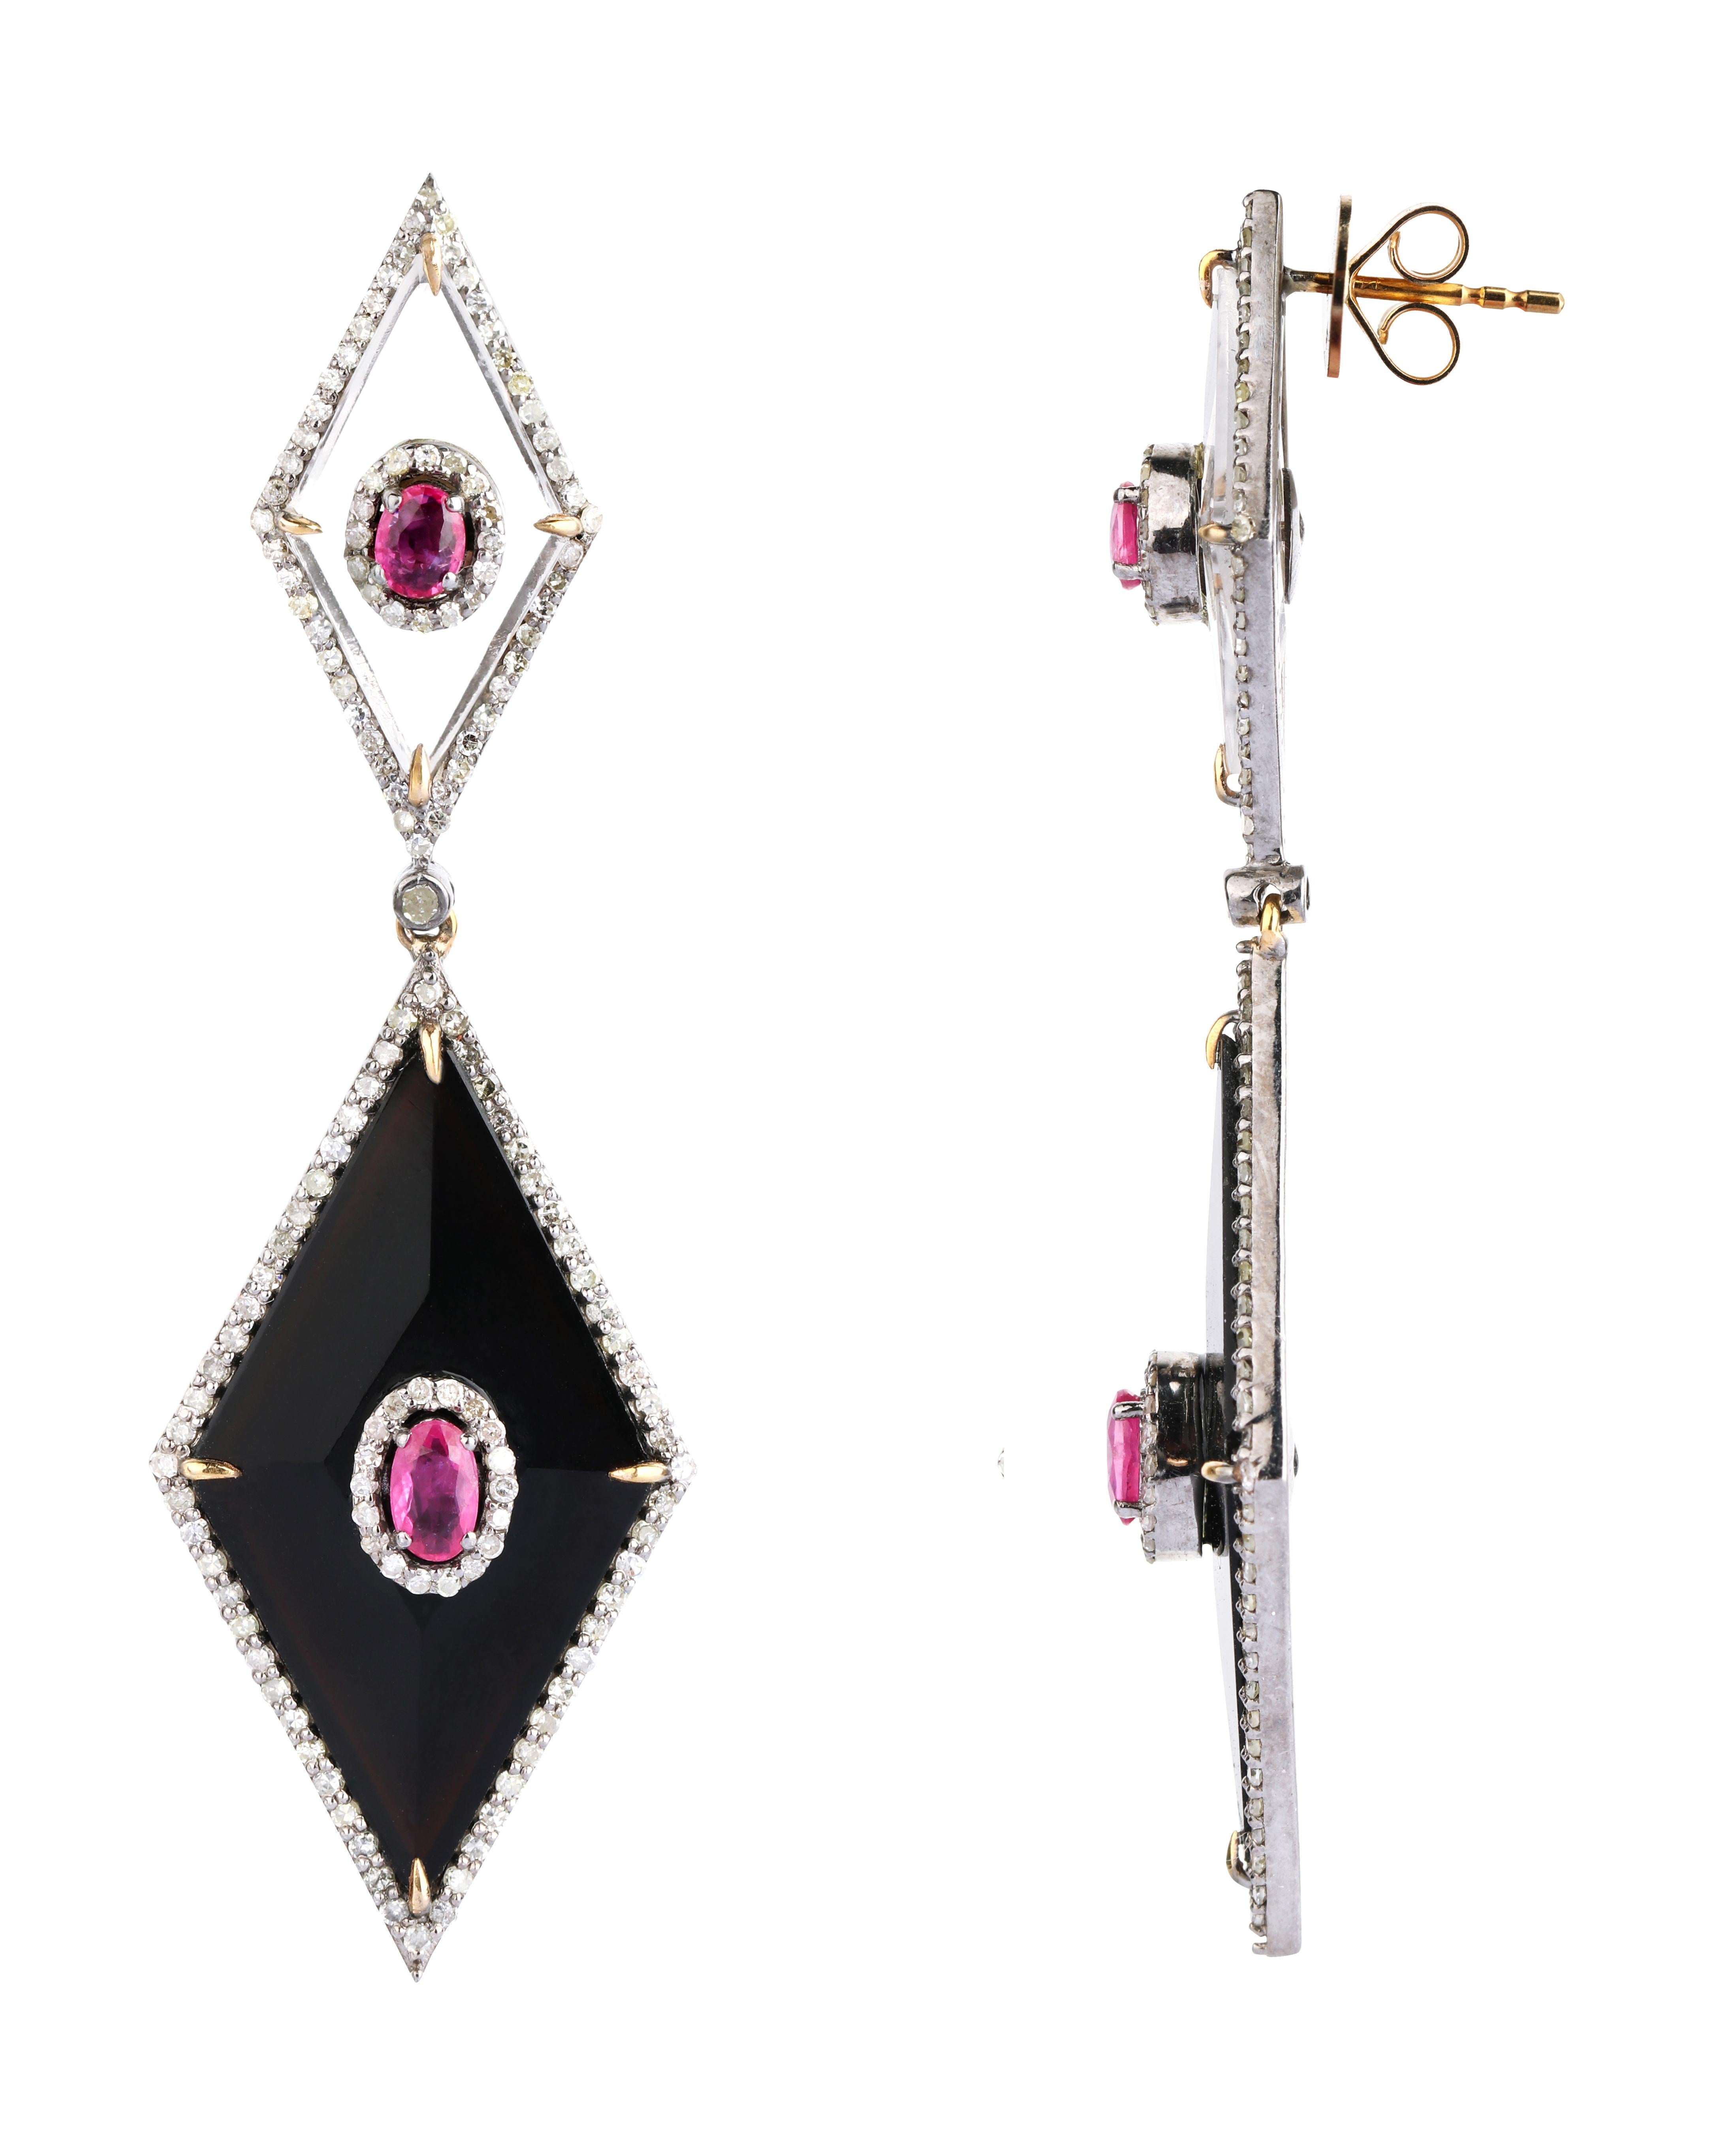 21.52 Carat Ruby, Diamond, Onyx, and Crystal Dangle Earring in Modern Style 

Passion and expertise come together in this intricate earring set embellished with diamonds, crystal, onyx, and ruby in elegant and artistic patterns. This set of earrings